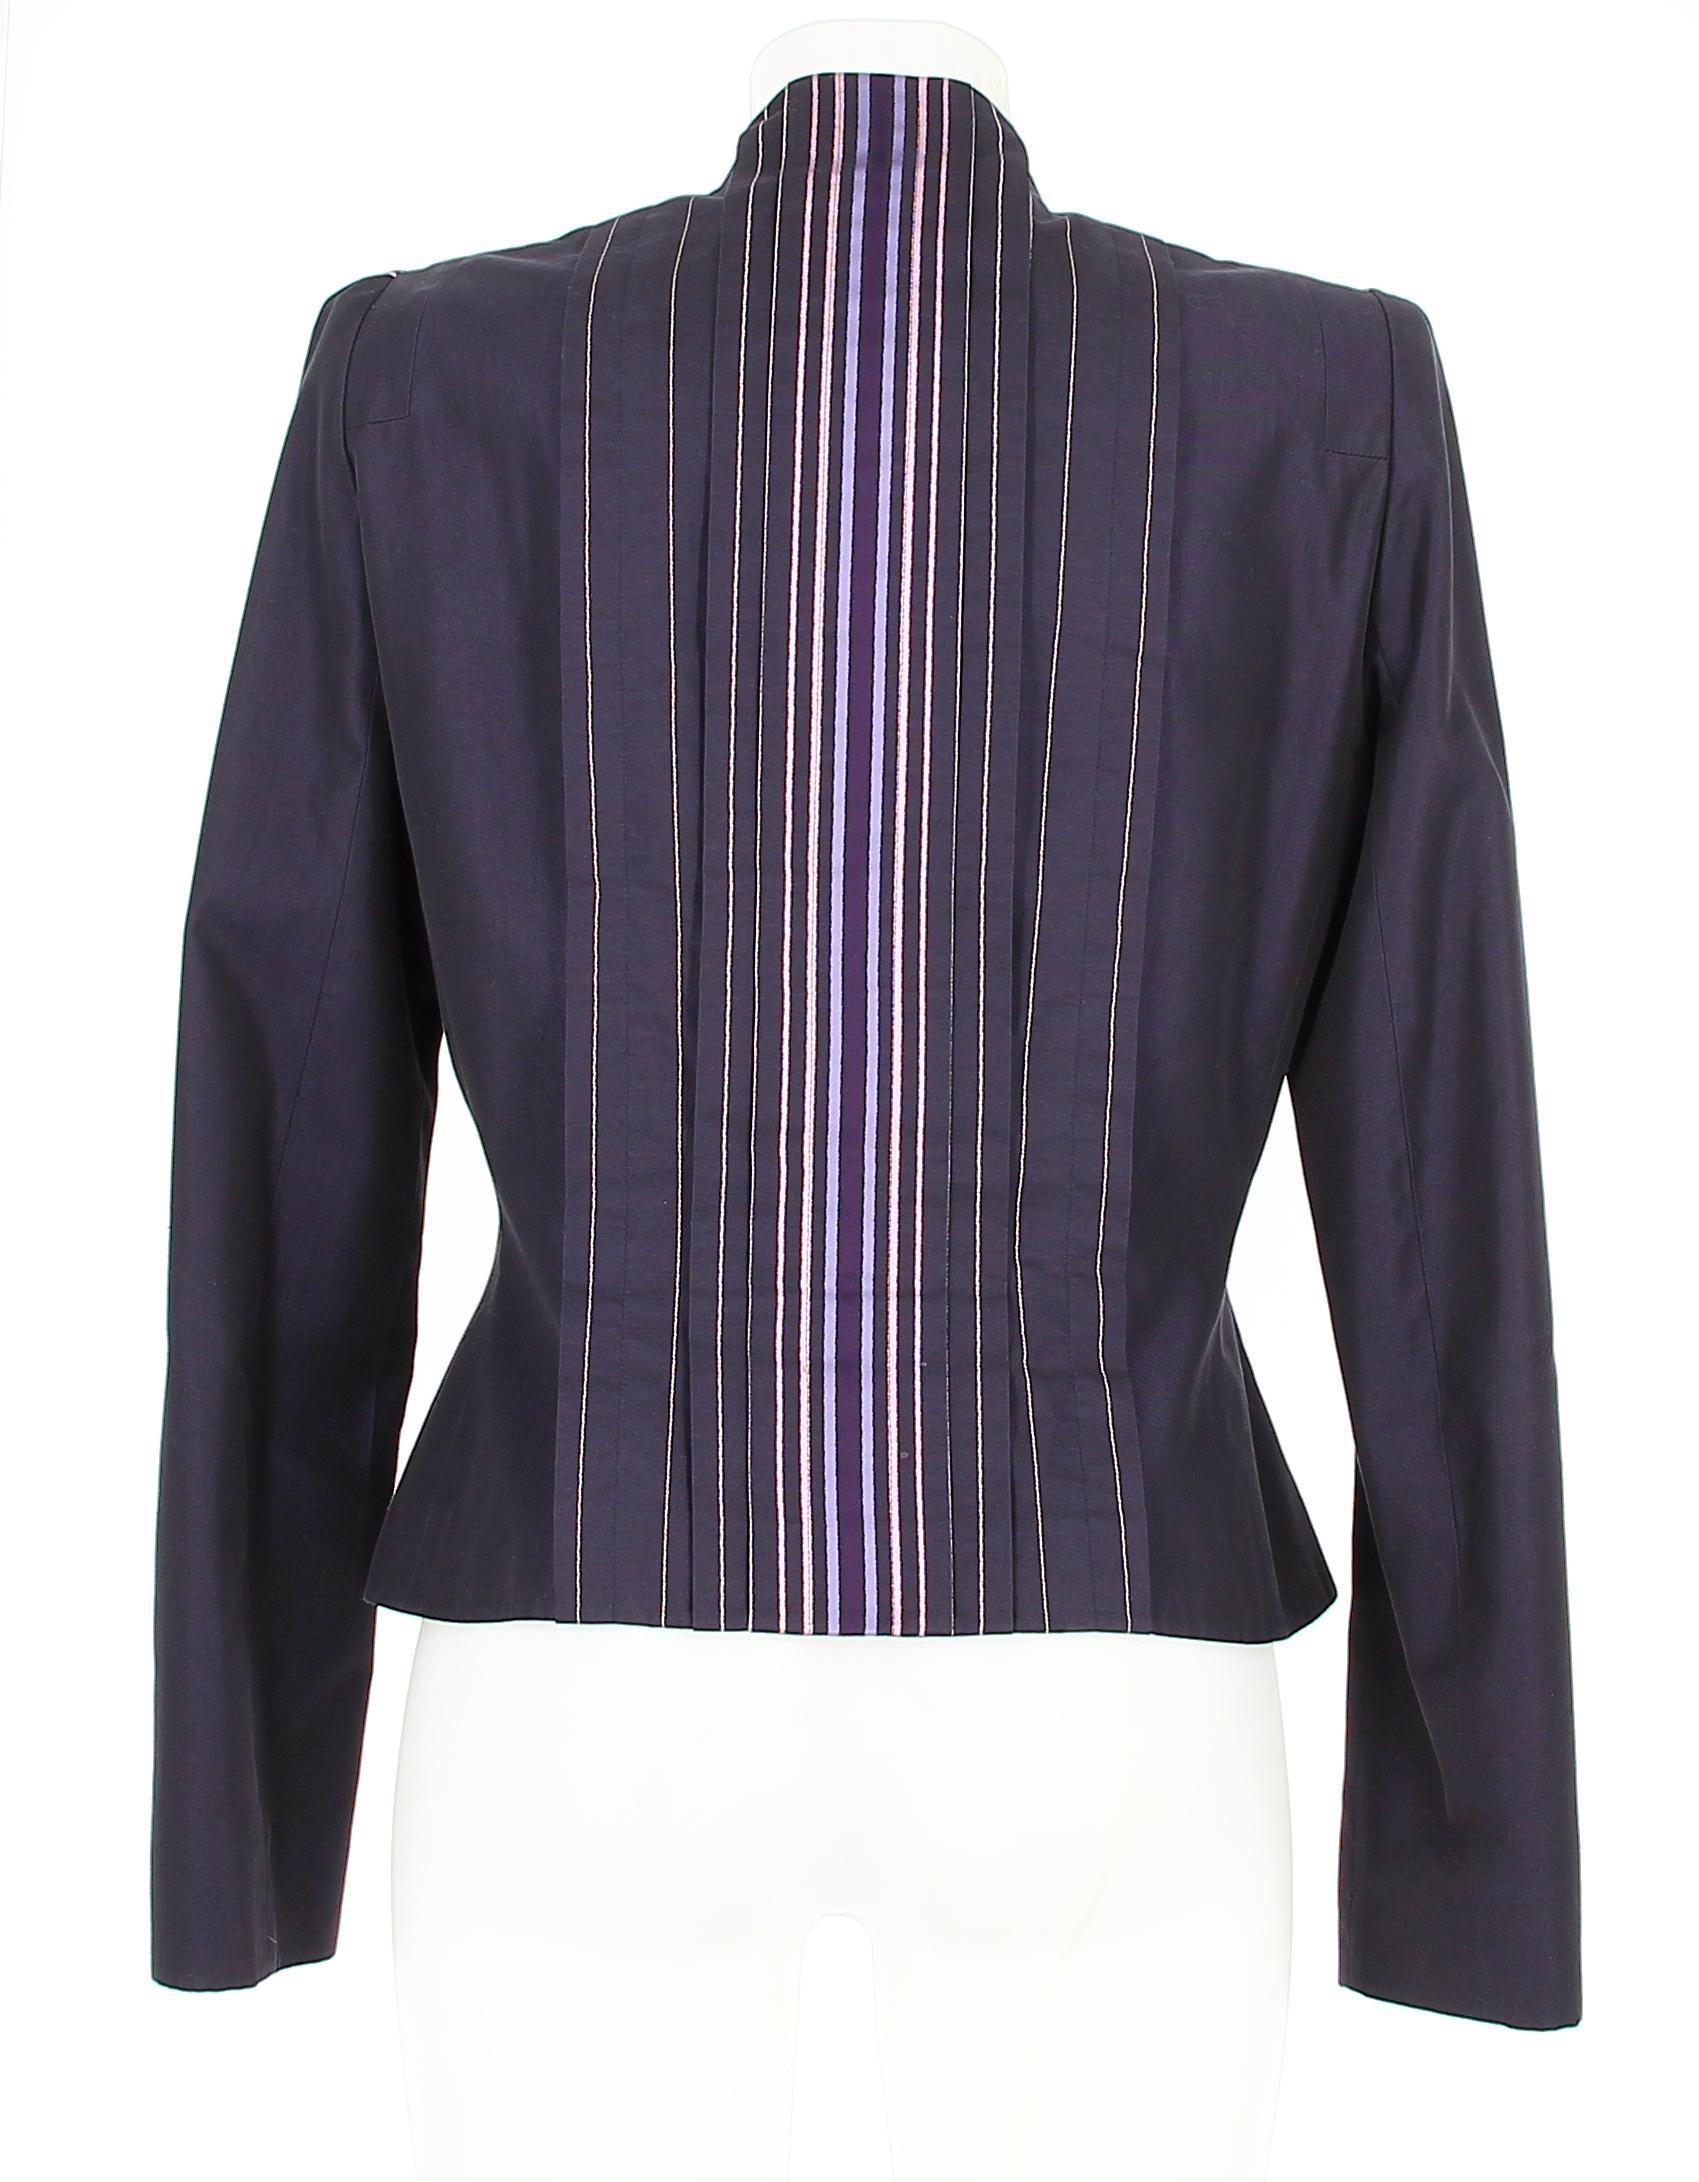 Black Thierry Mugler Couture Purple Jacket